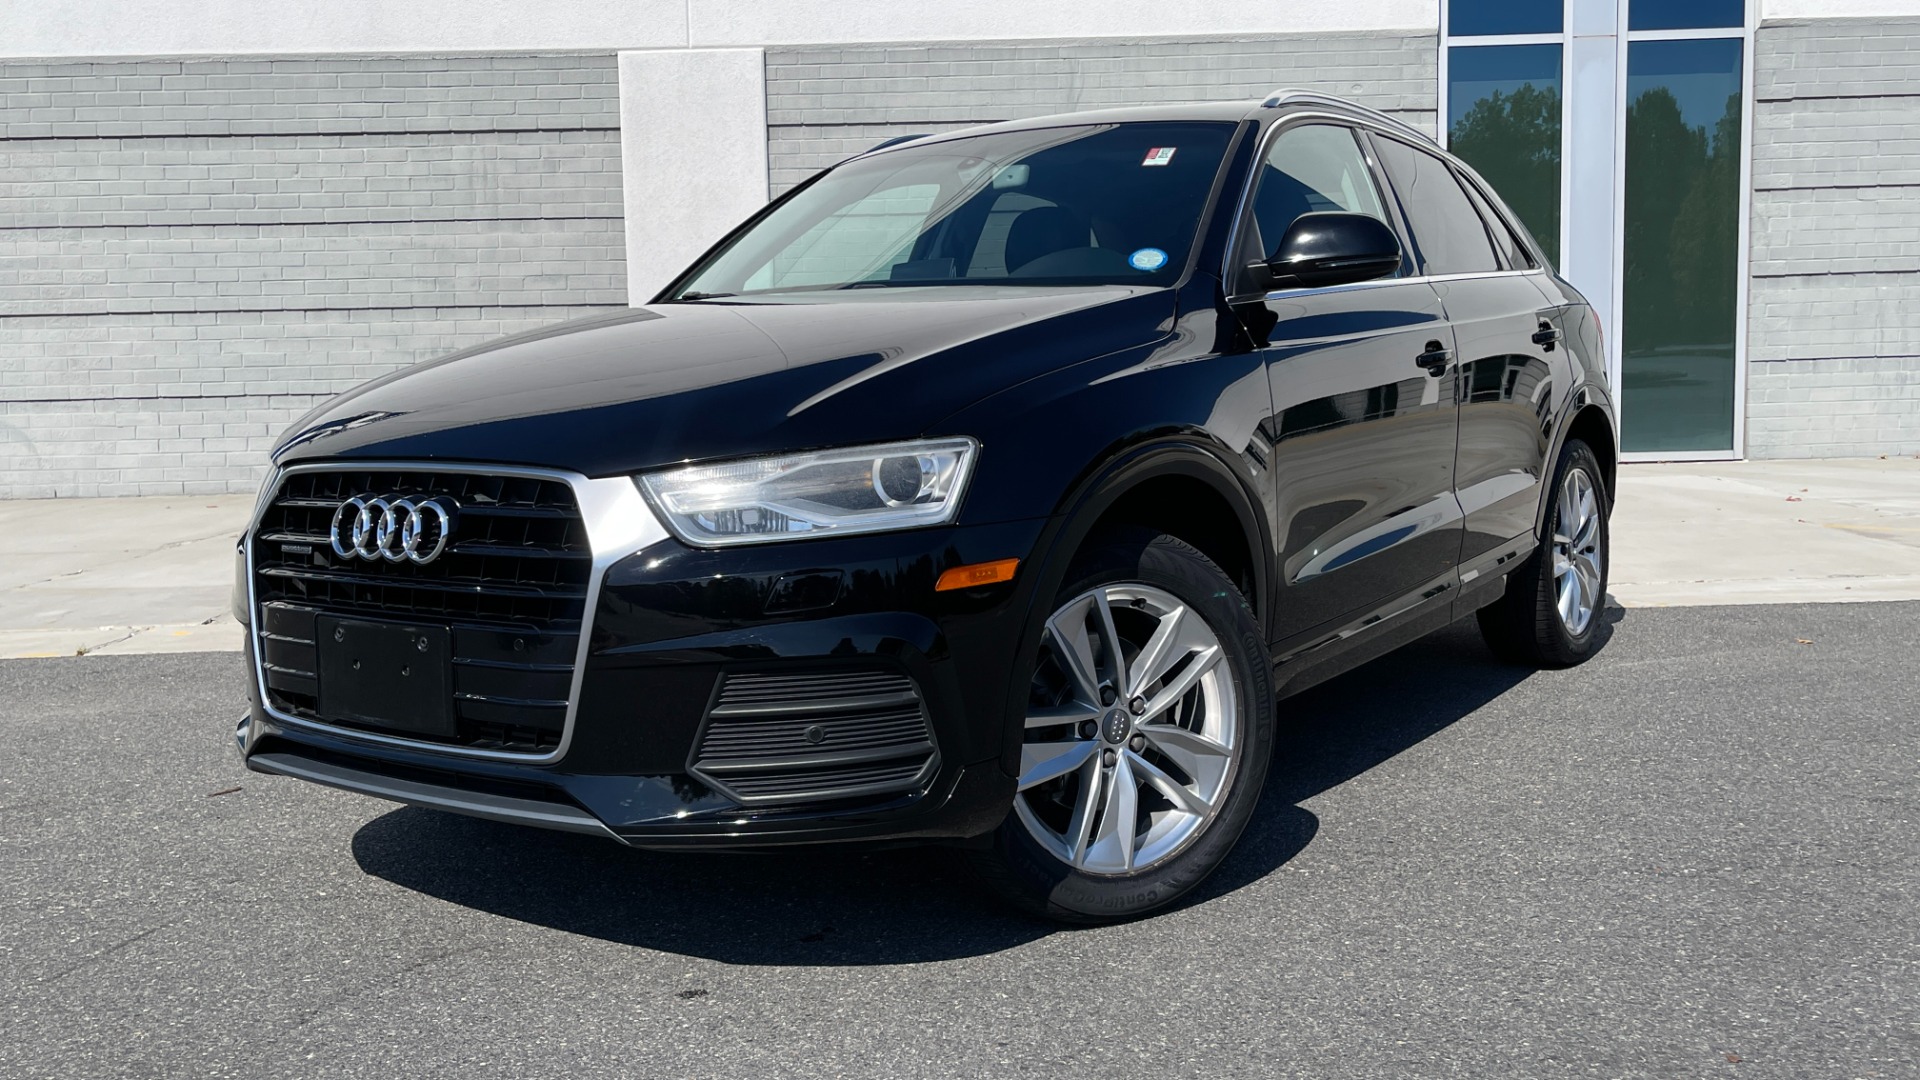 Used 2016 Audi Q3 PREMIUM PLUS / LEATHER / BACKUP CAMERA / HOMELINK / SIRIUS XM / AWD for sale $22,684 at Formula Imports in Charlotte NC 28227 44